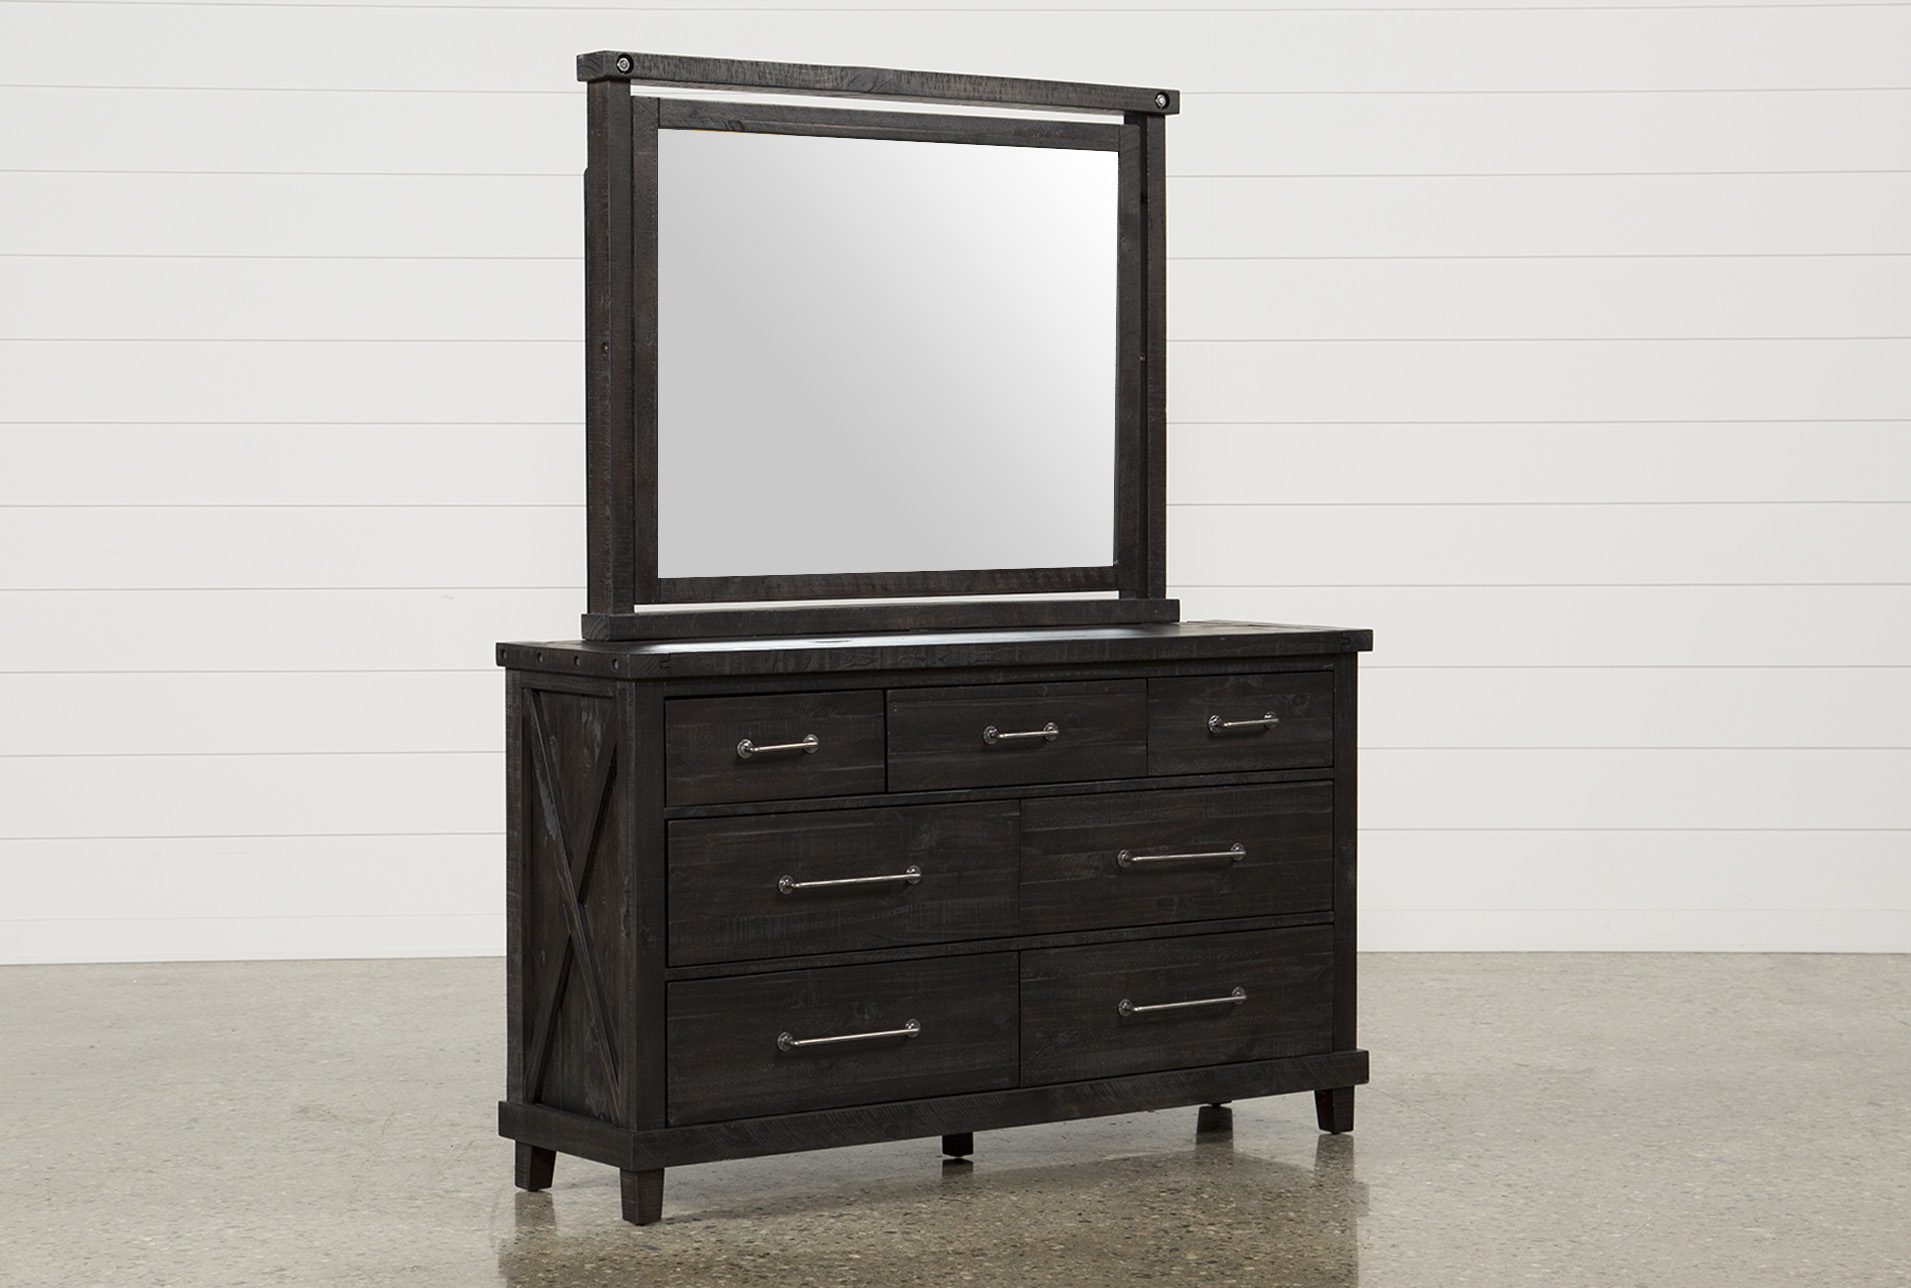 Dresser with mirror Jaxon dresser / mirror (number: 1) has been successfully added to your shopping cart.  KOBEPLL